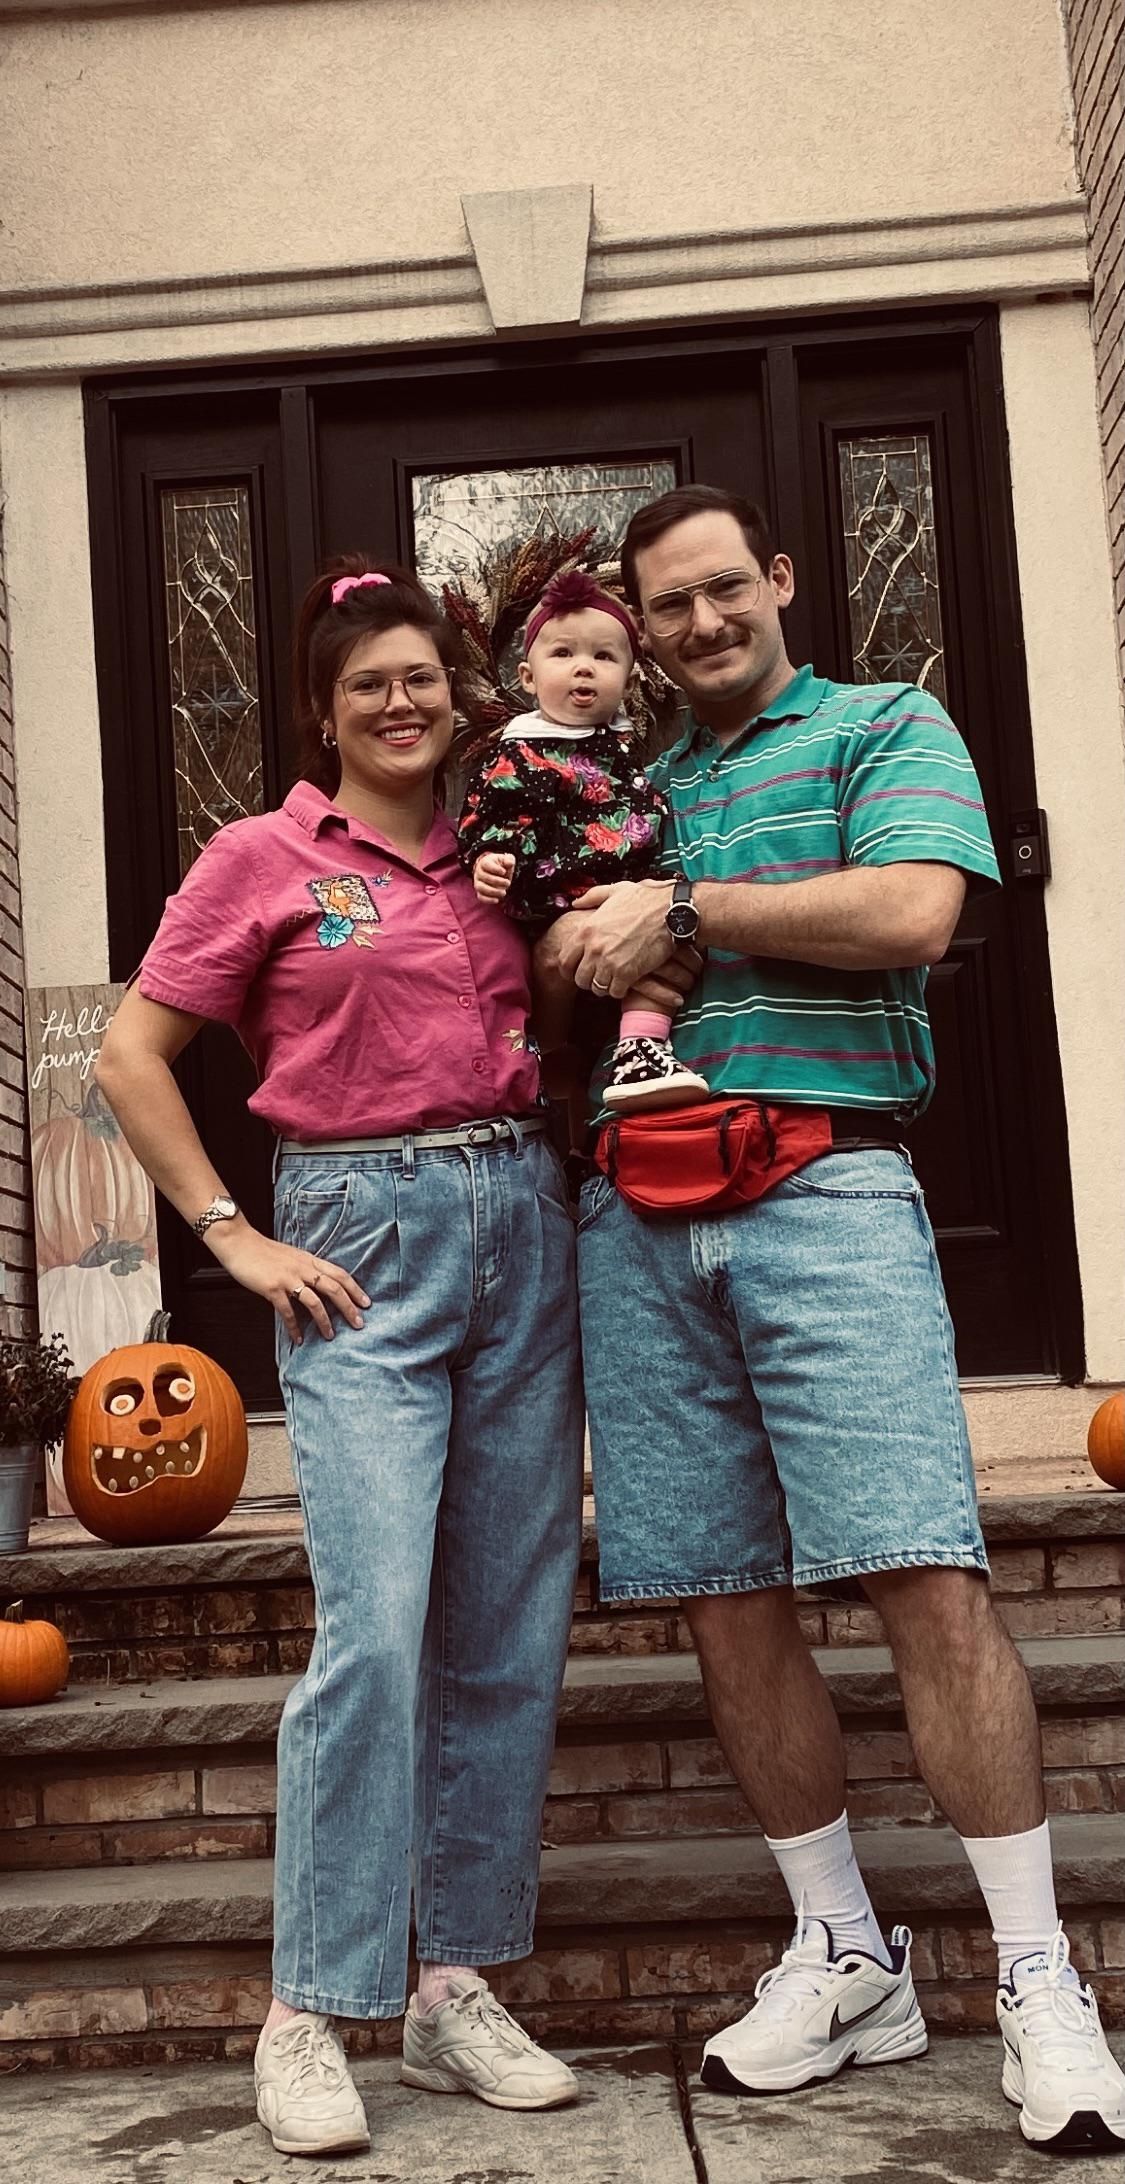 We dressed as an early 90s family - how did we do?